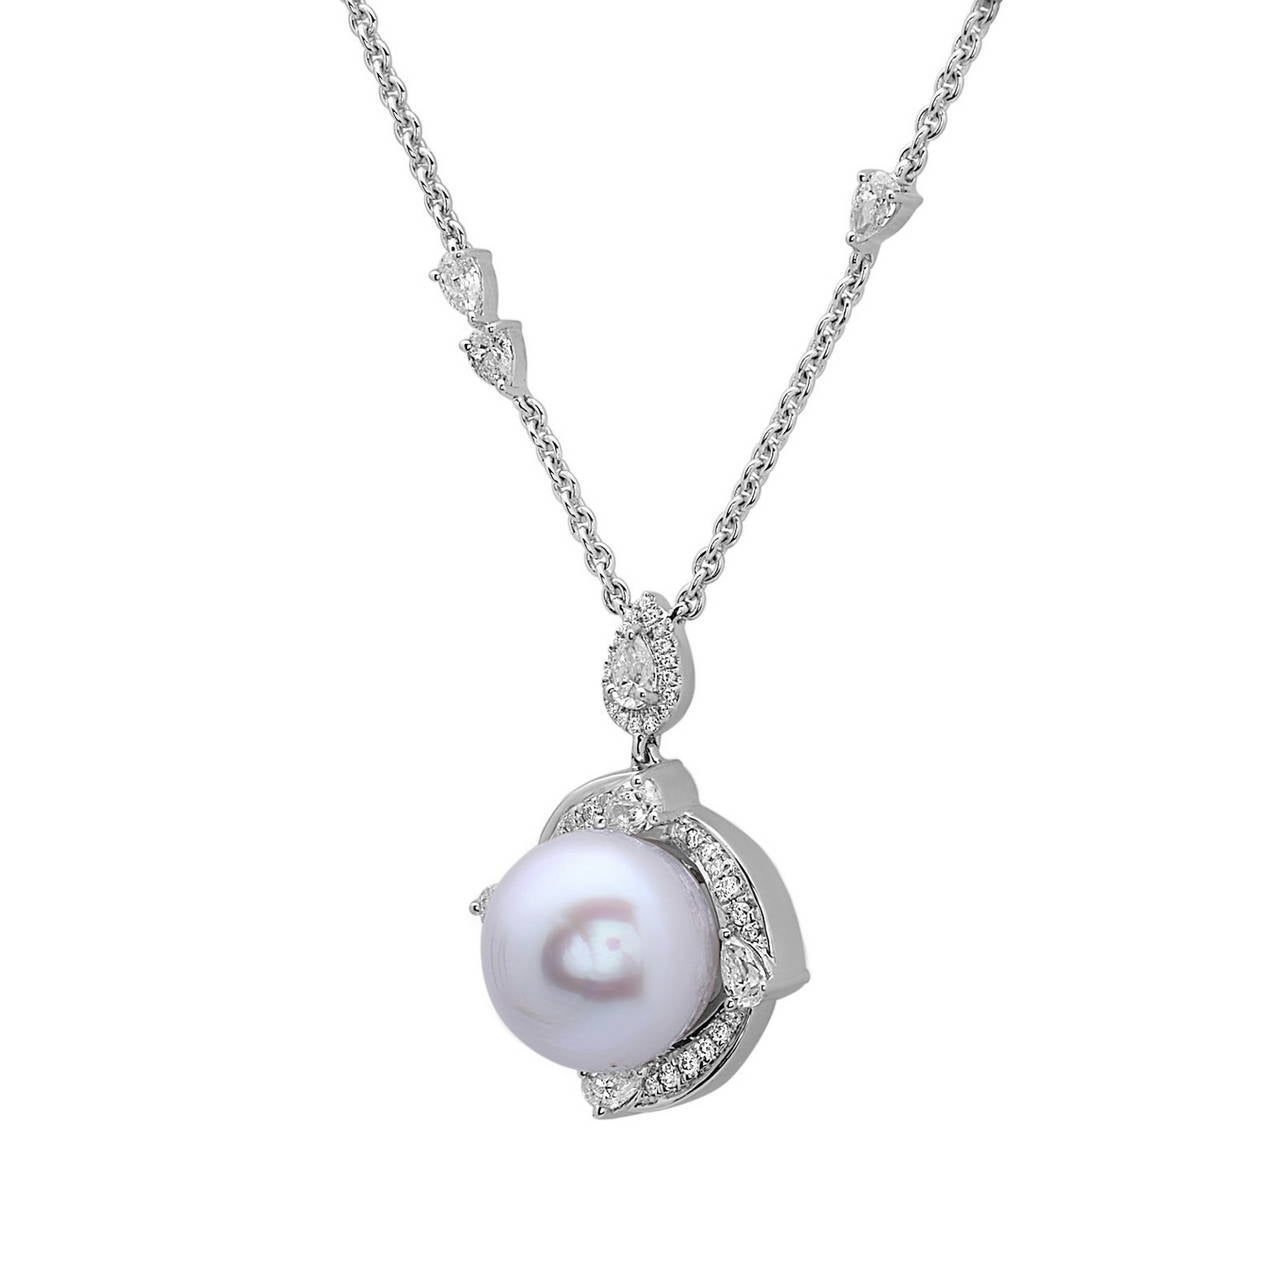 18K White Gold Diamond & White Pearl Necklace 20 inch long with small pear shape diamonds on chain. The chain has a lobster clasp. Length can be adjusted with an extra jumpring at the end of the chain

Diamond weight: 1.66, Quality: G color S1